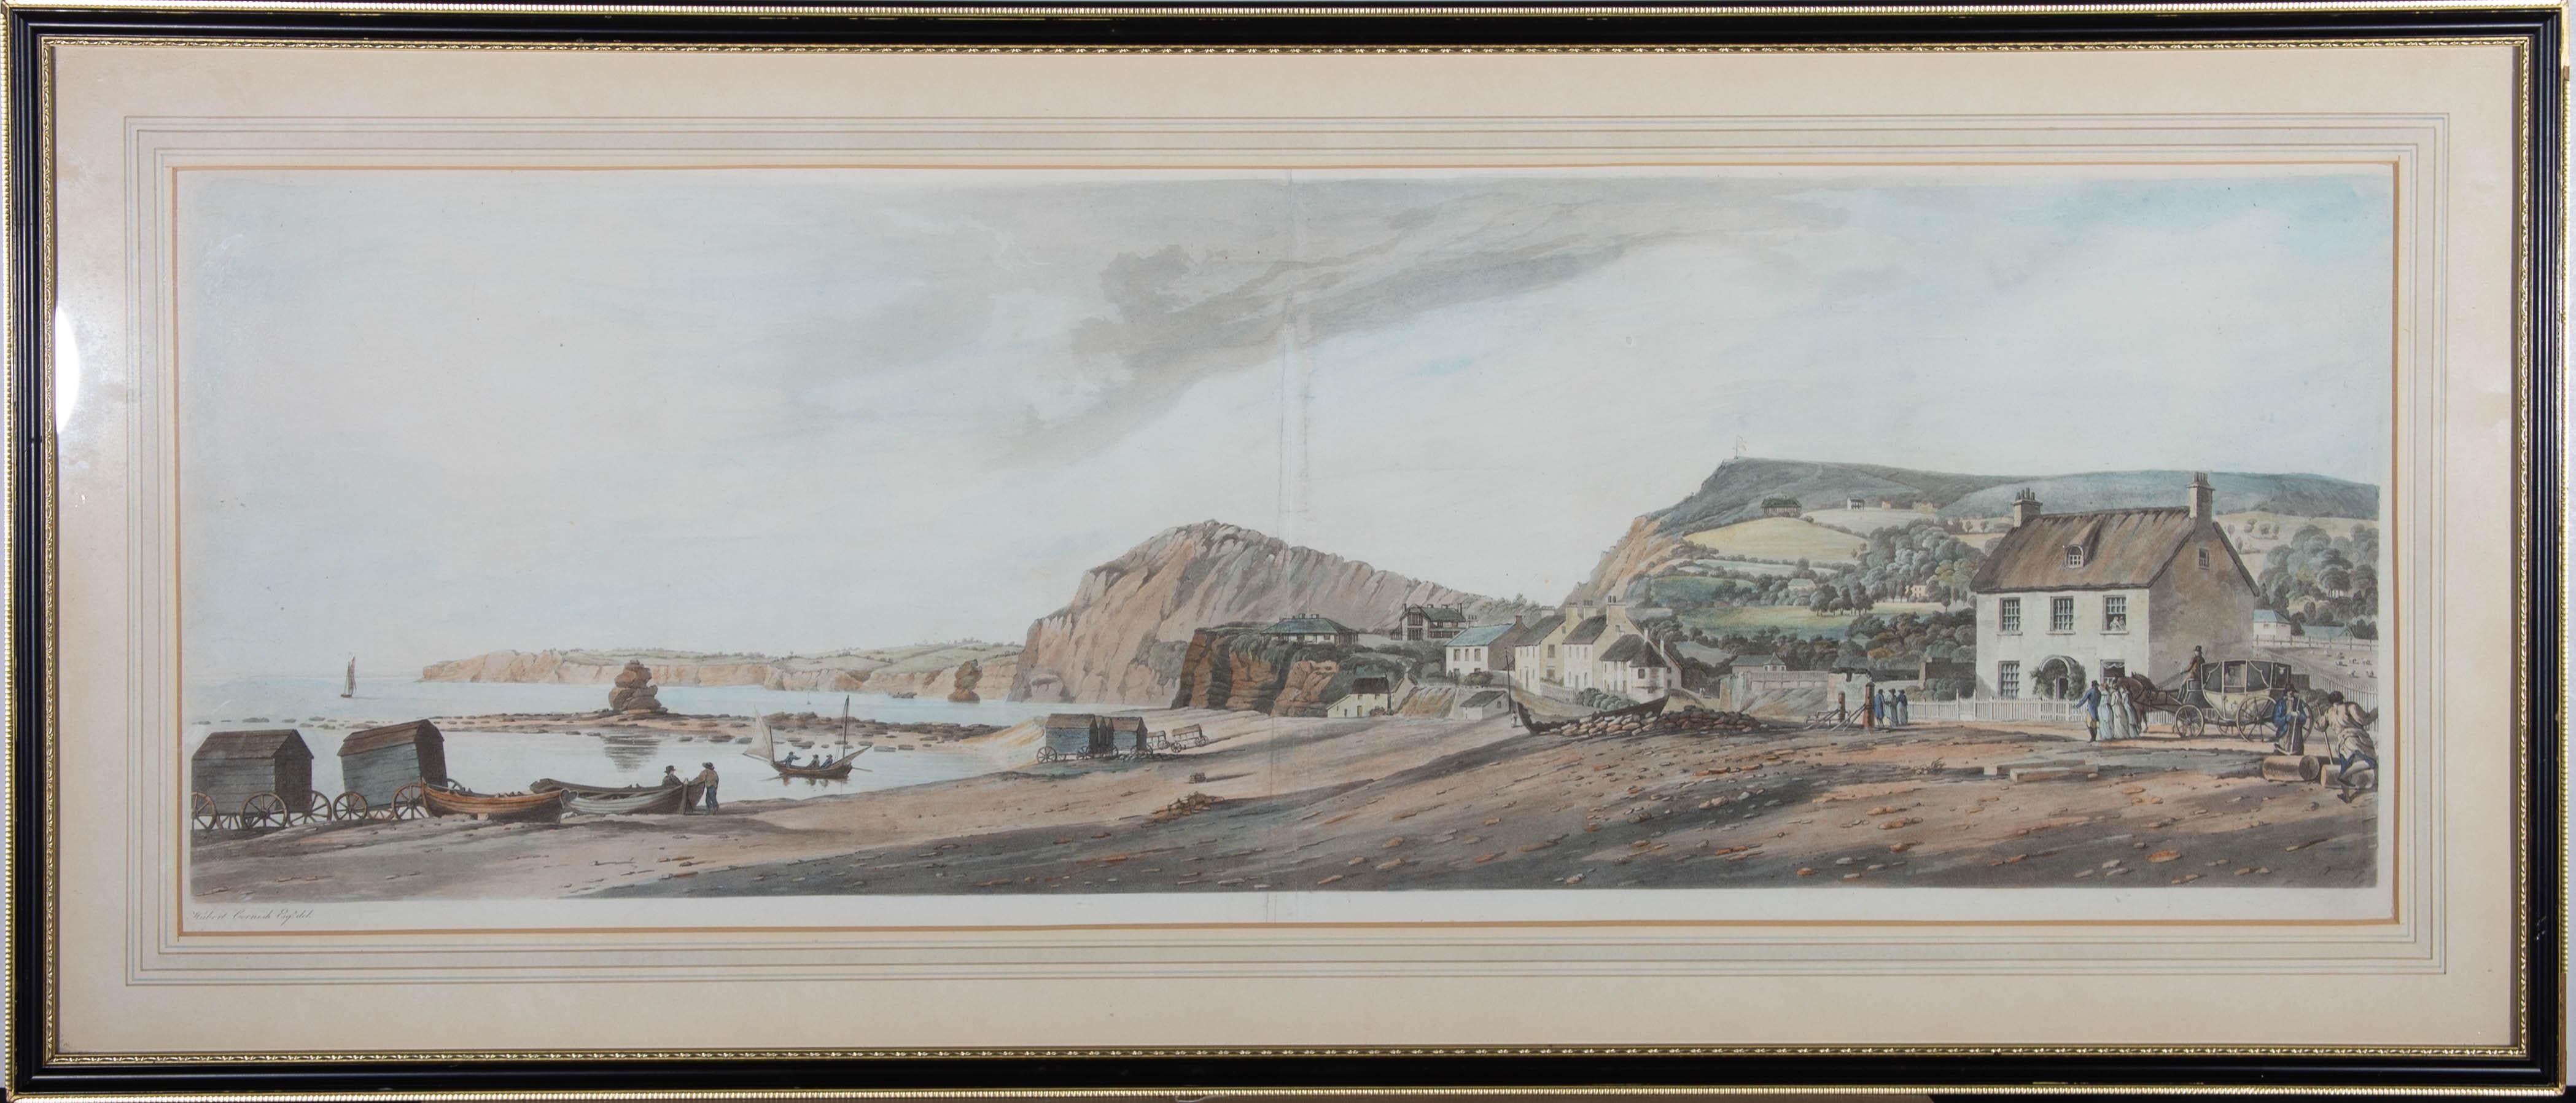 This charming aquatint depicts the coast of Sidmouth, Devon in fine detail. Fishing boats and trailers line the shore while finely dressed people travel along the road. Signed to the lower right. Well presented in a Hogarth style frame. On wove.
